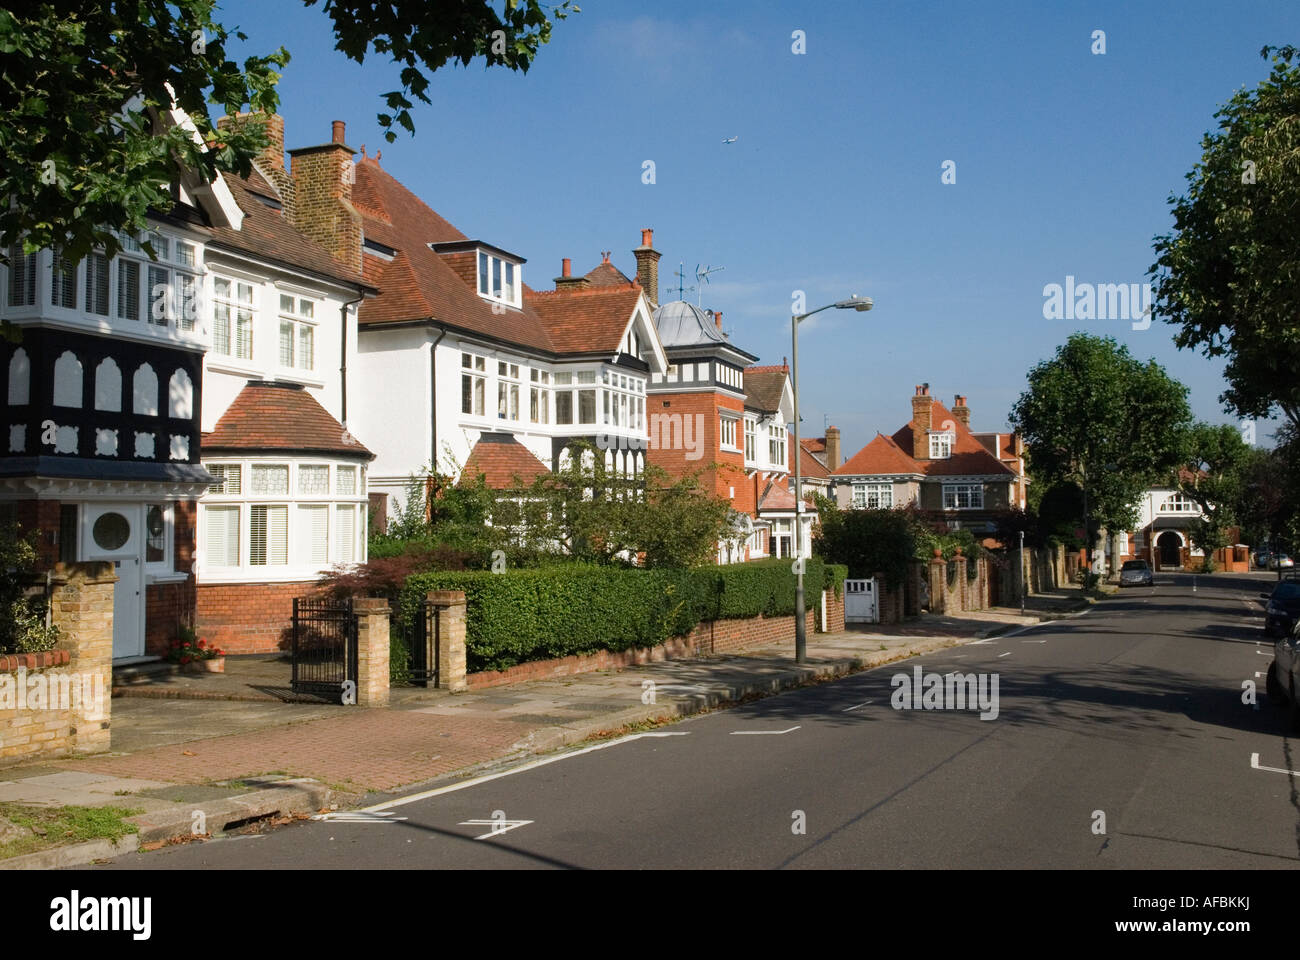 Housing uk typical large expensive private homes. Putney south west London Genoa Avenue.    HOMER SYKES Stock Photo